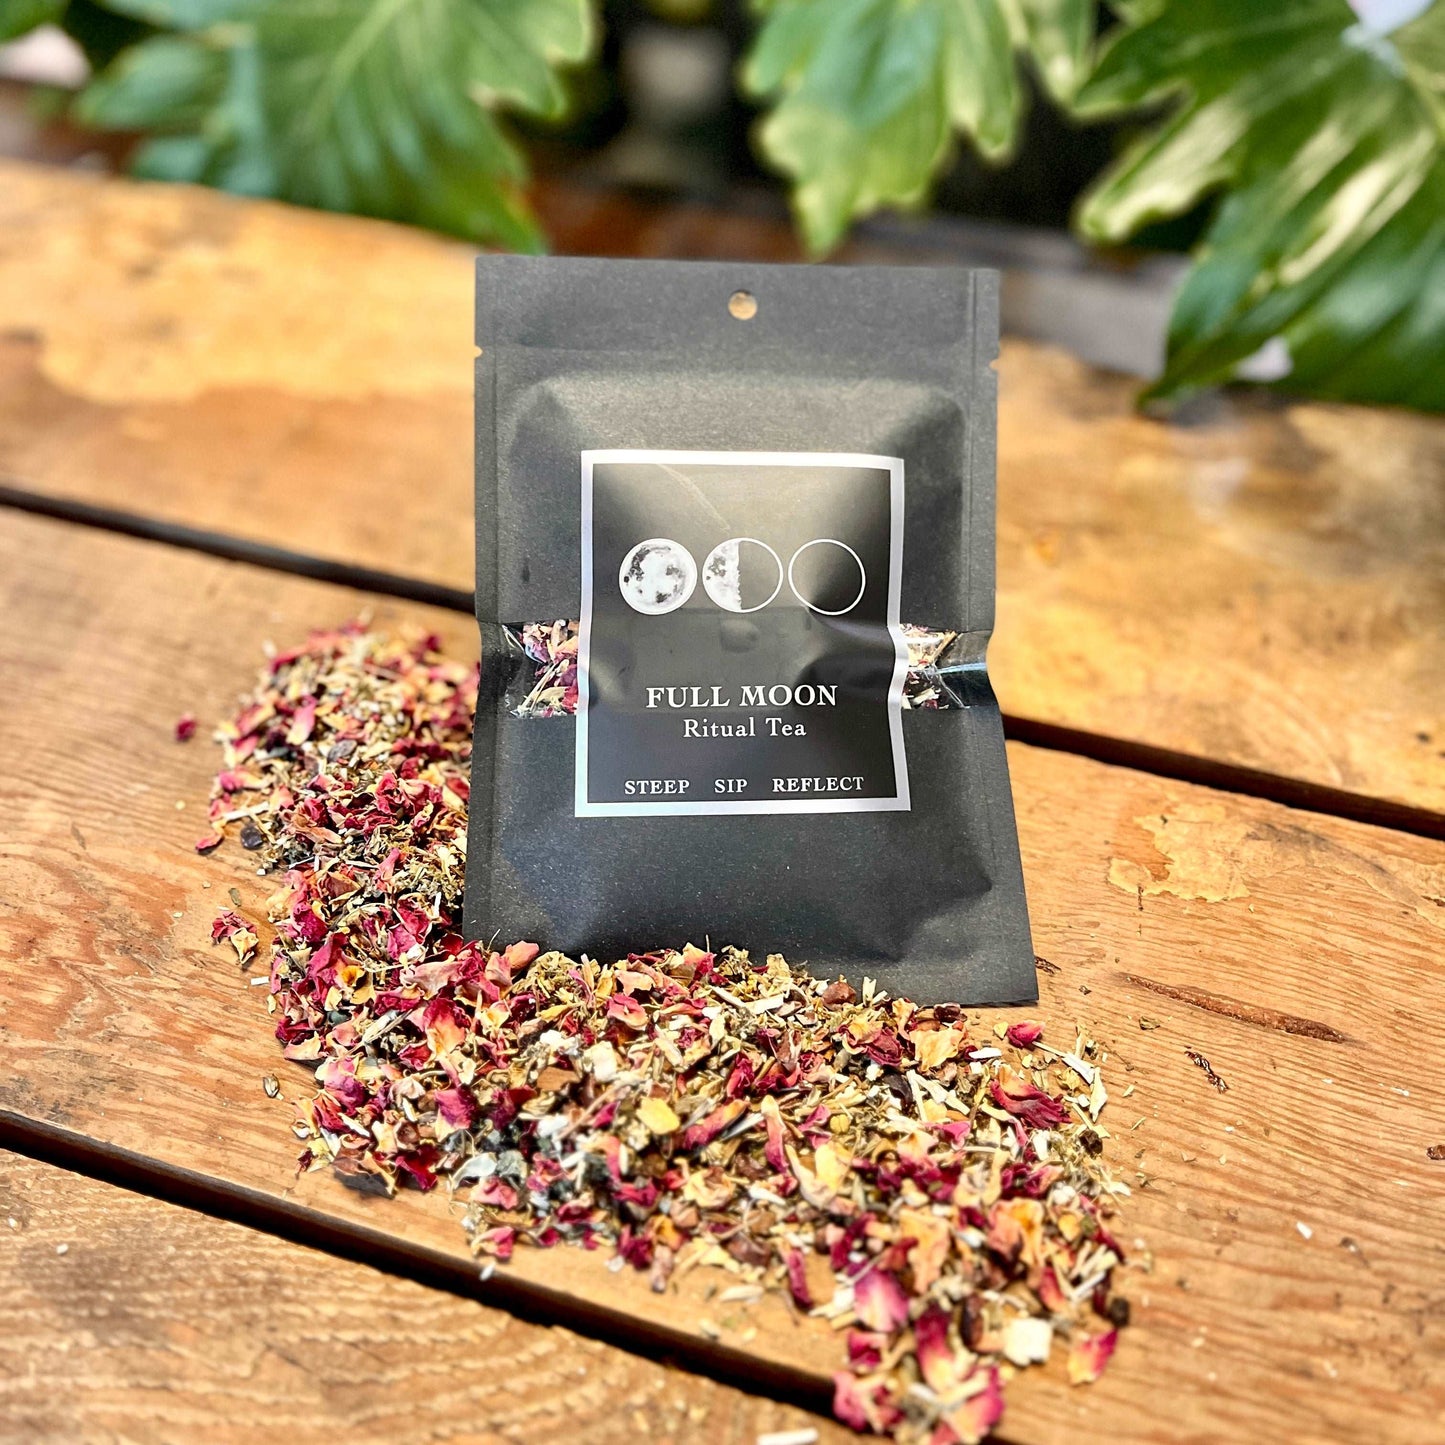 Indulge in the magic of our Full Moon Release Ritual Tea. This organic blend features cocoa, motherwort, gotu kola, cassia, ginger, and black pepper. Crafted to complement the energy of the full moon, this rich and invigorating tea supports release and renewal during your full moon rituals. Elevate your lunar experience with this flavorful infusion.